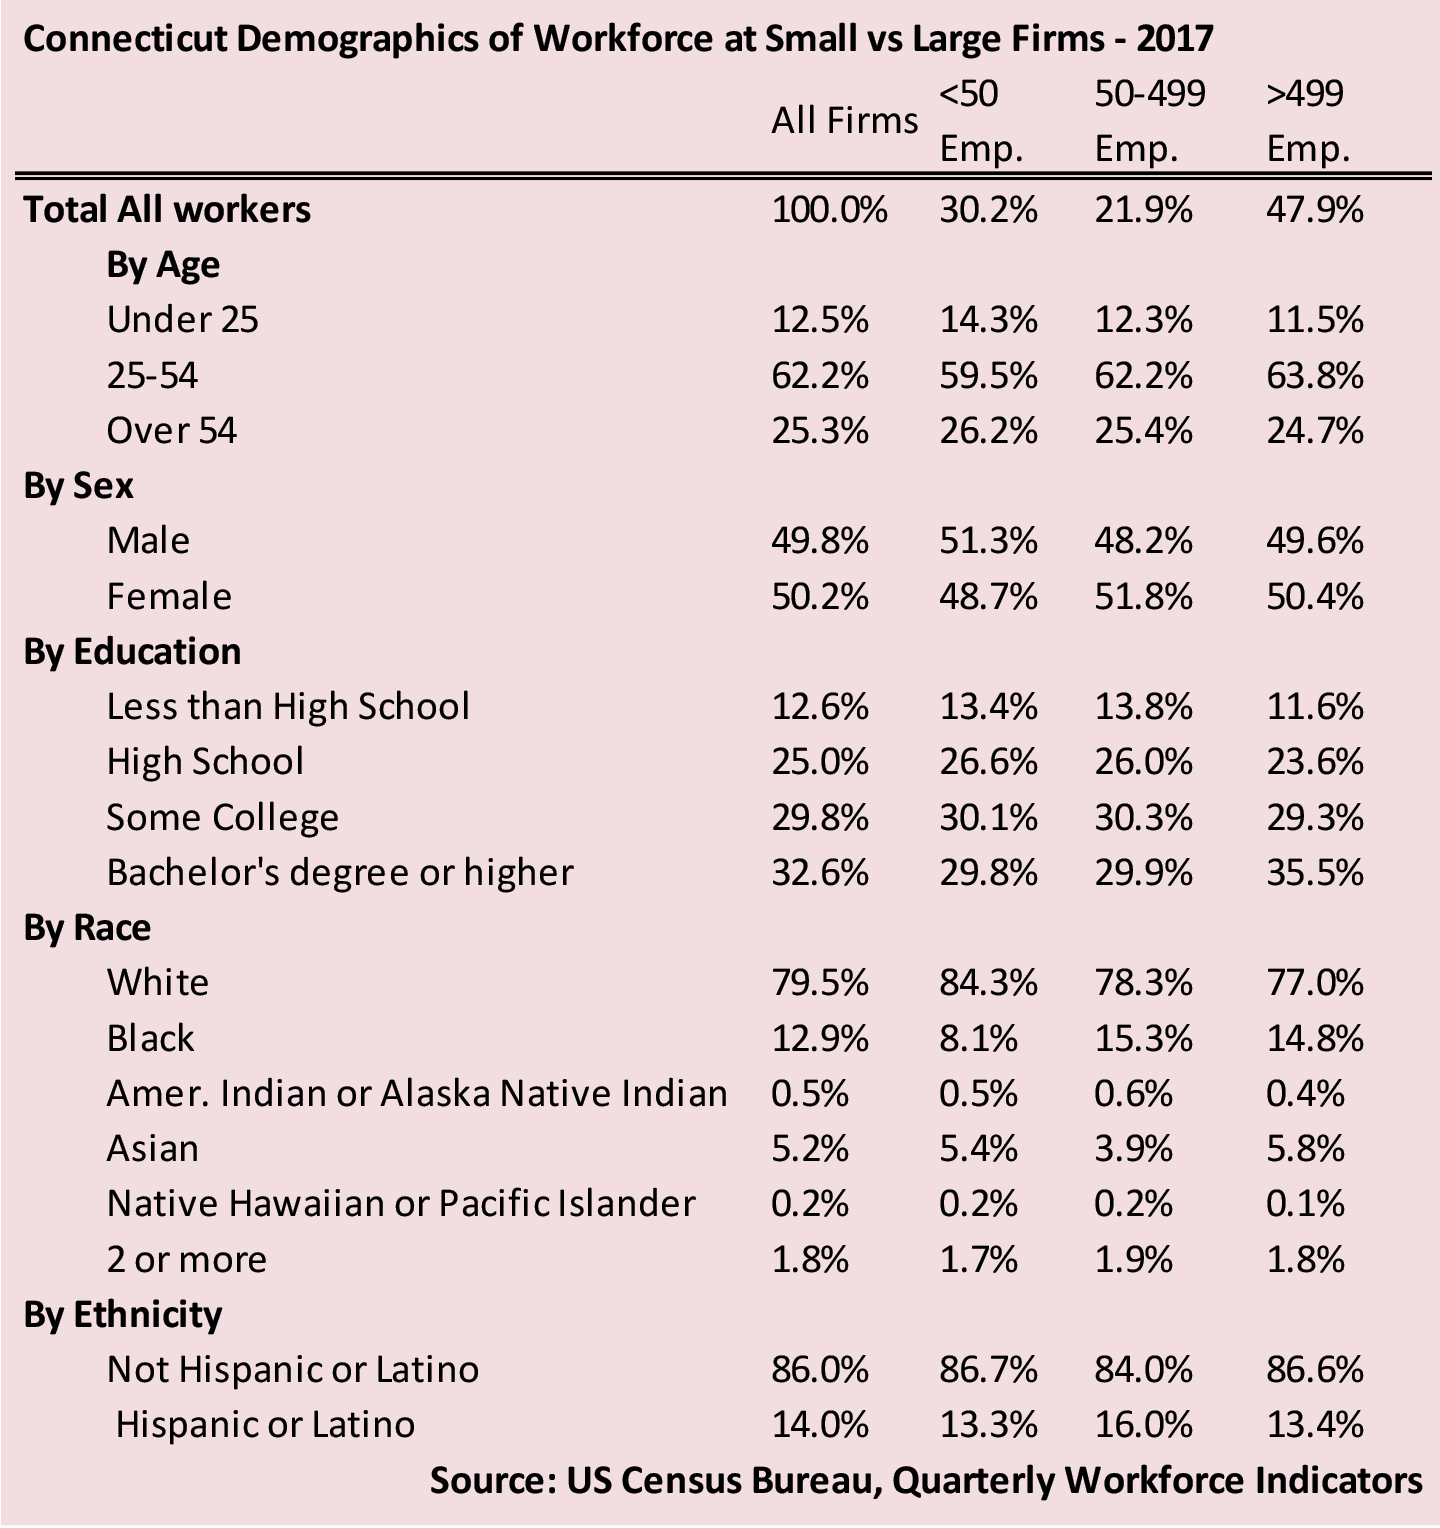 Connecticut Demographics of Workforce at Small vs Large Firms - 2017